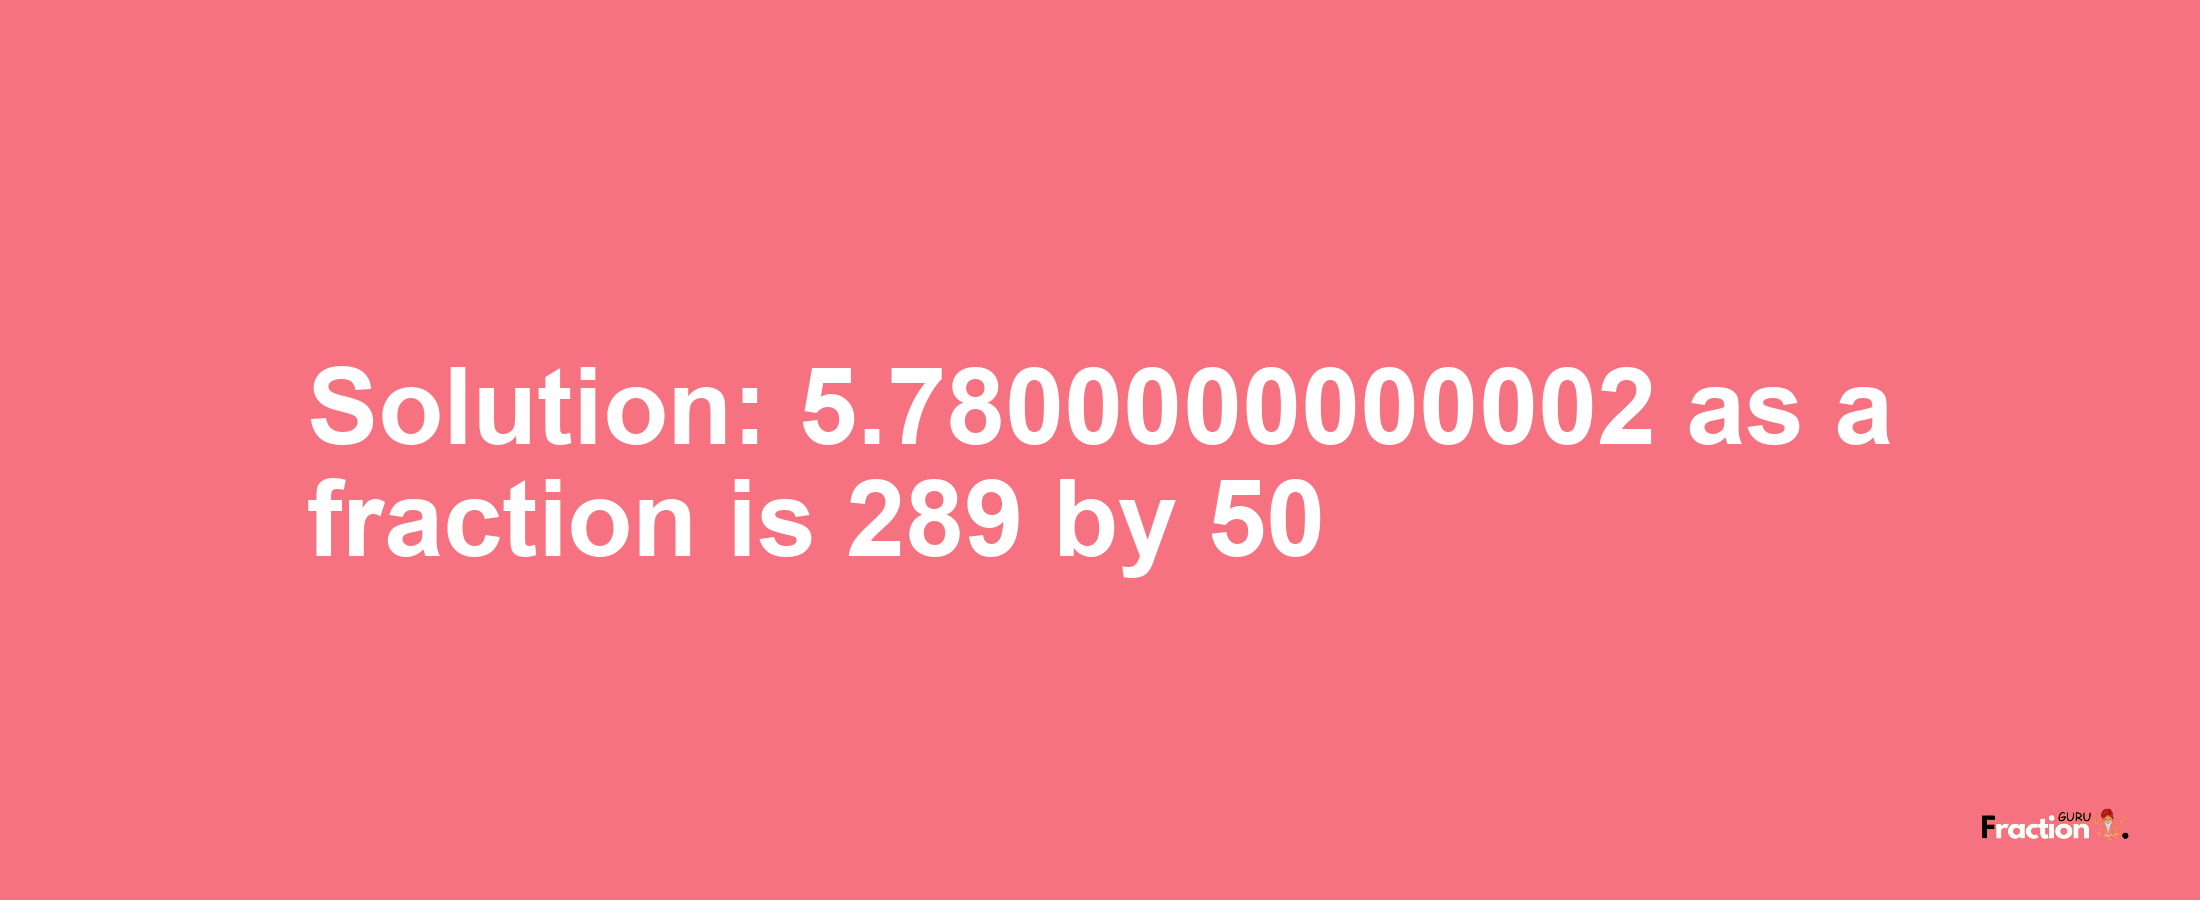 Solution:5.7800000000002 as a fraction is 289/50